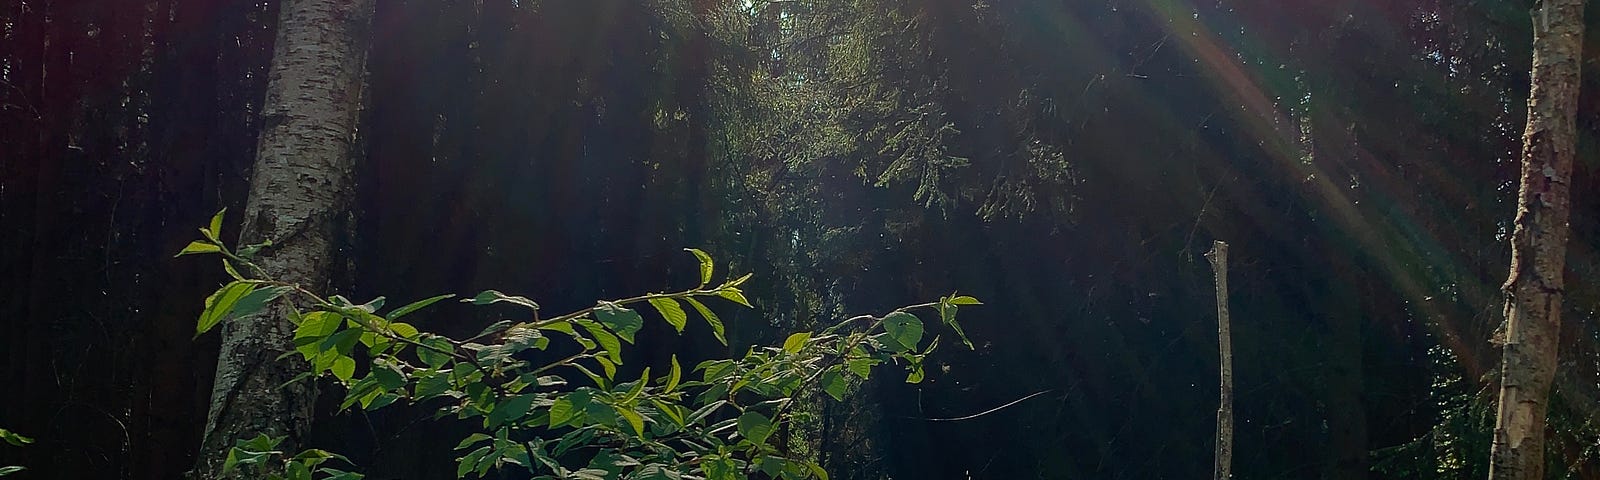 sunlight beams filtering through tree tops into a dark forest clearing